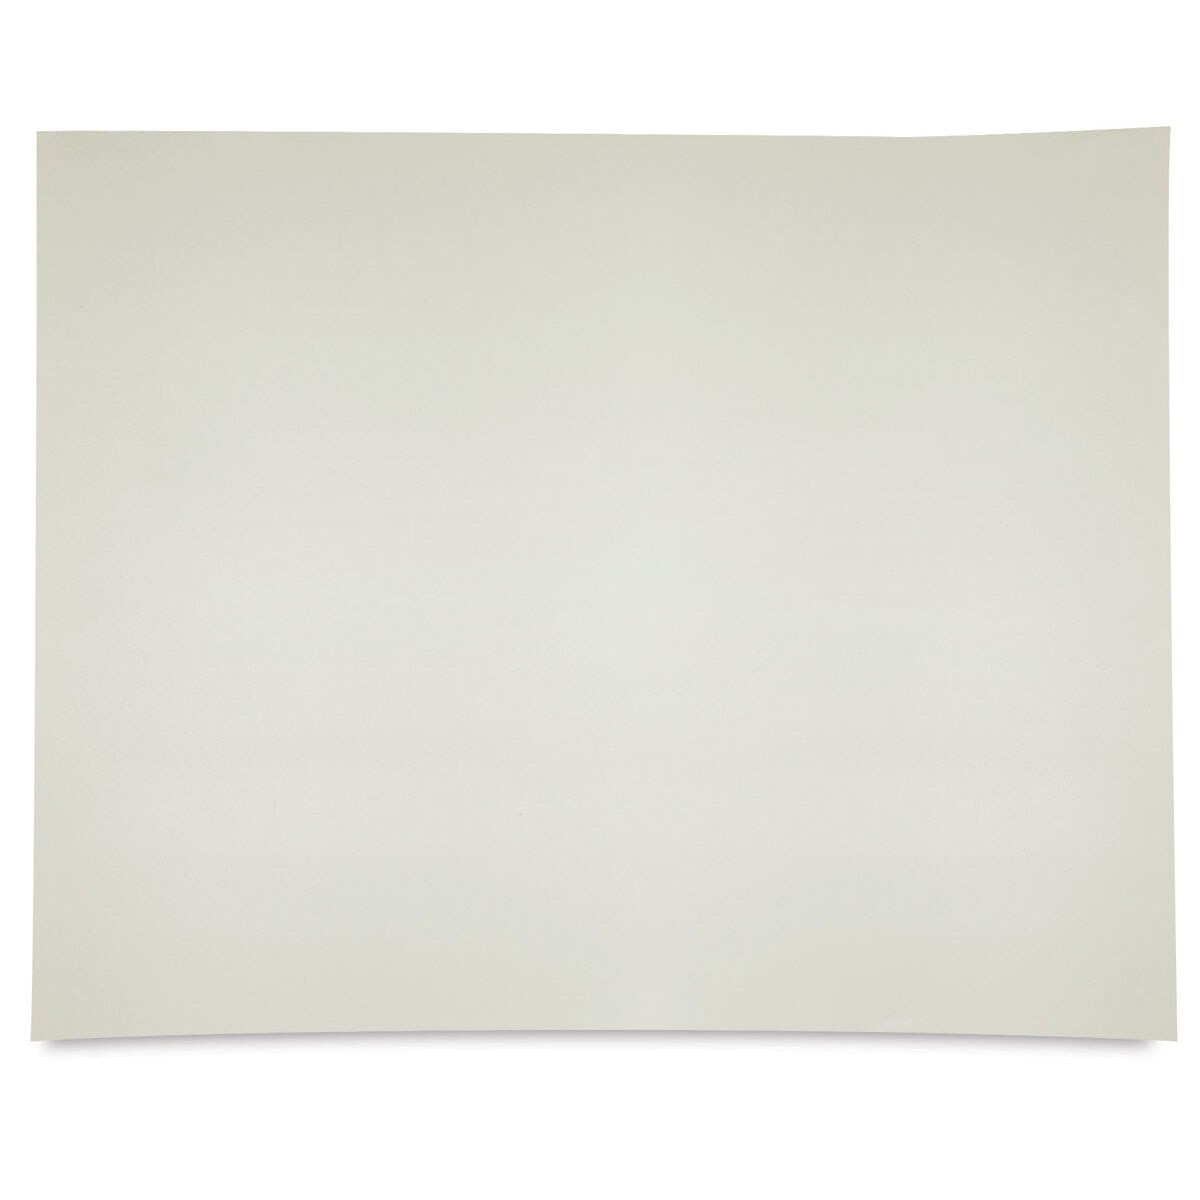 Thibra Thermoplastic Sheet - 21.65IN X 26.77IN